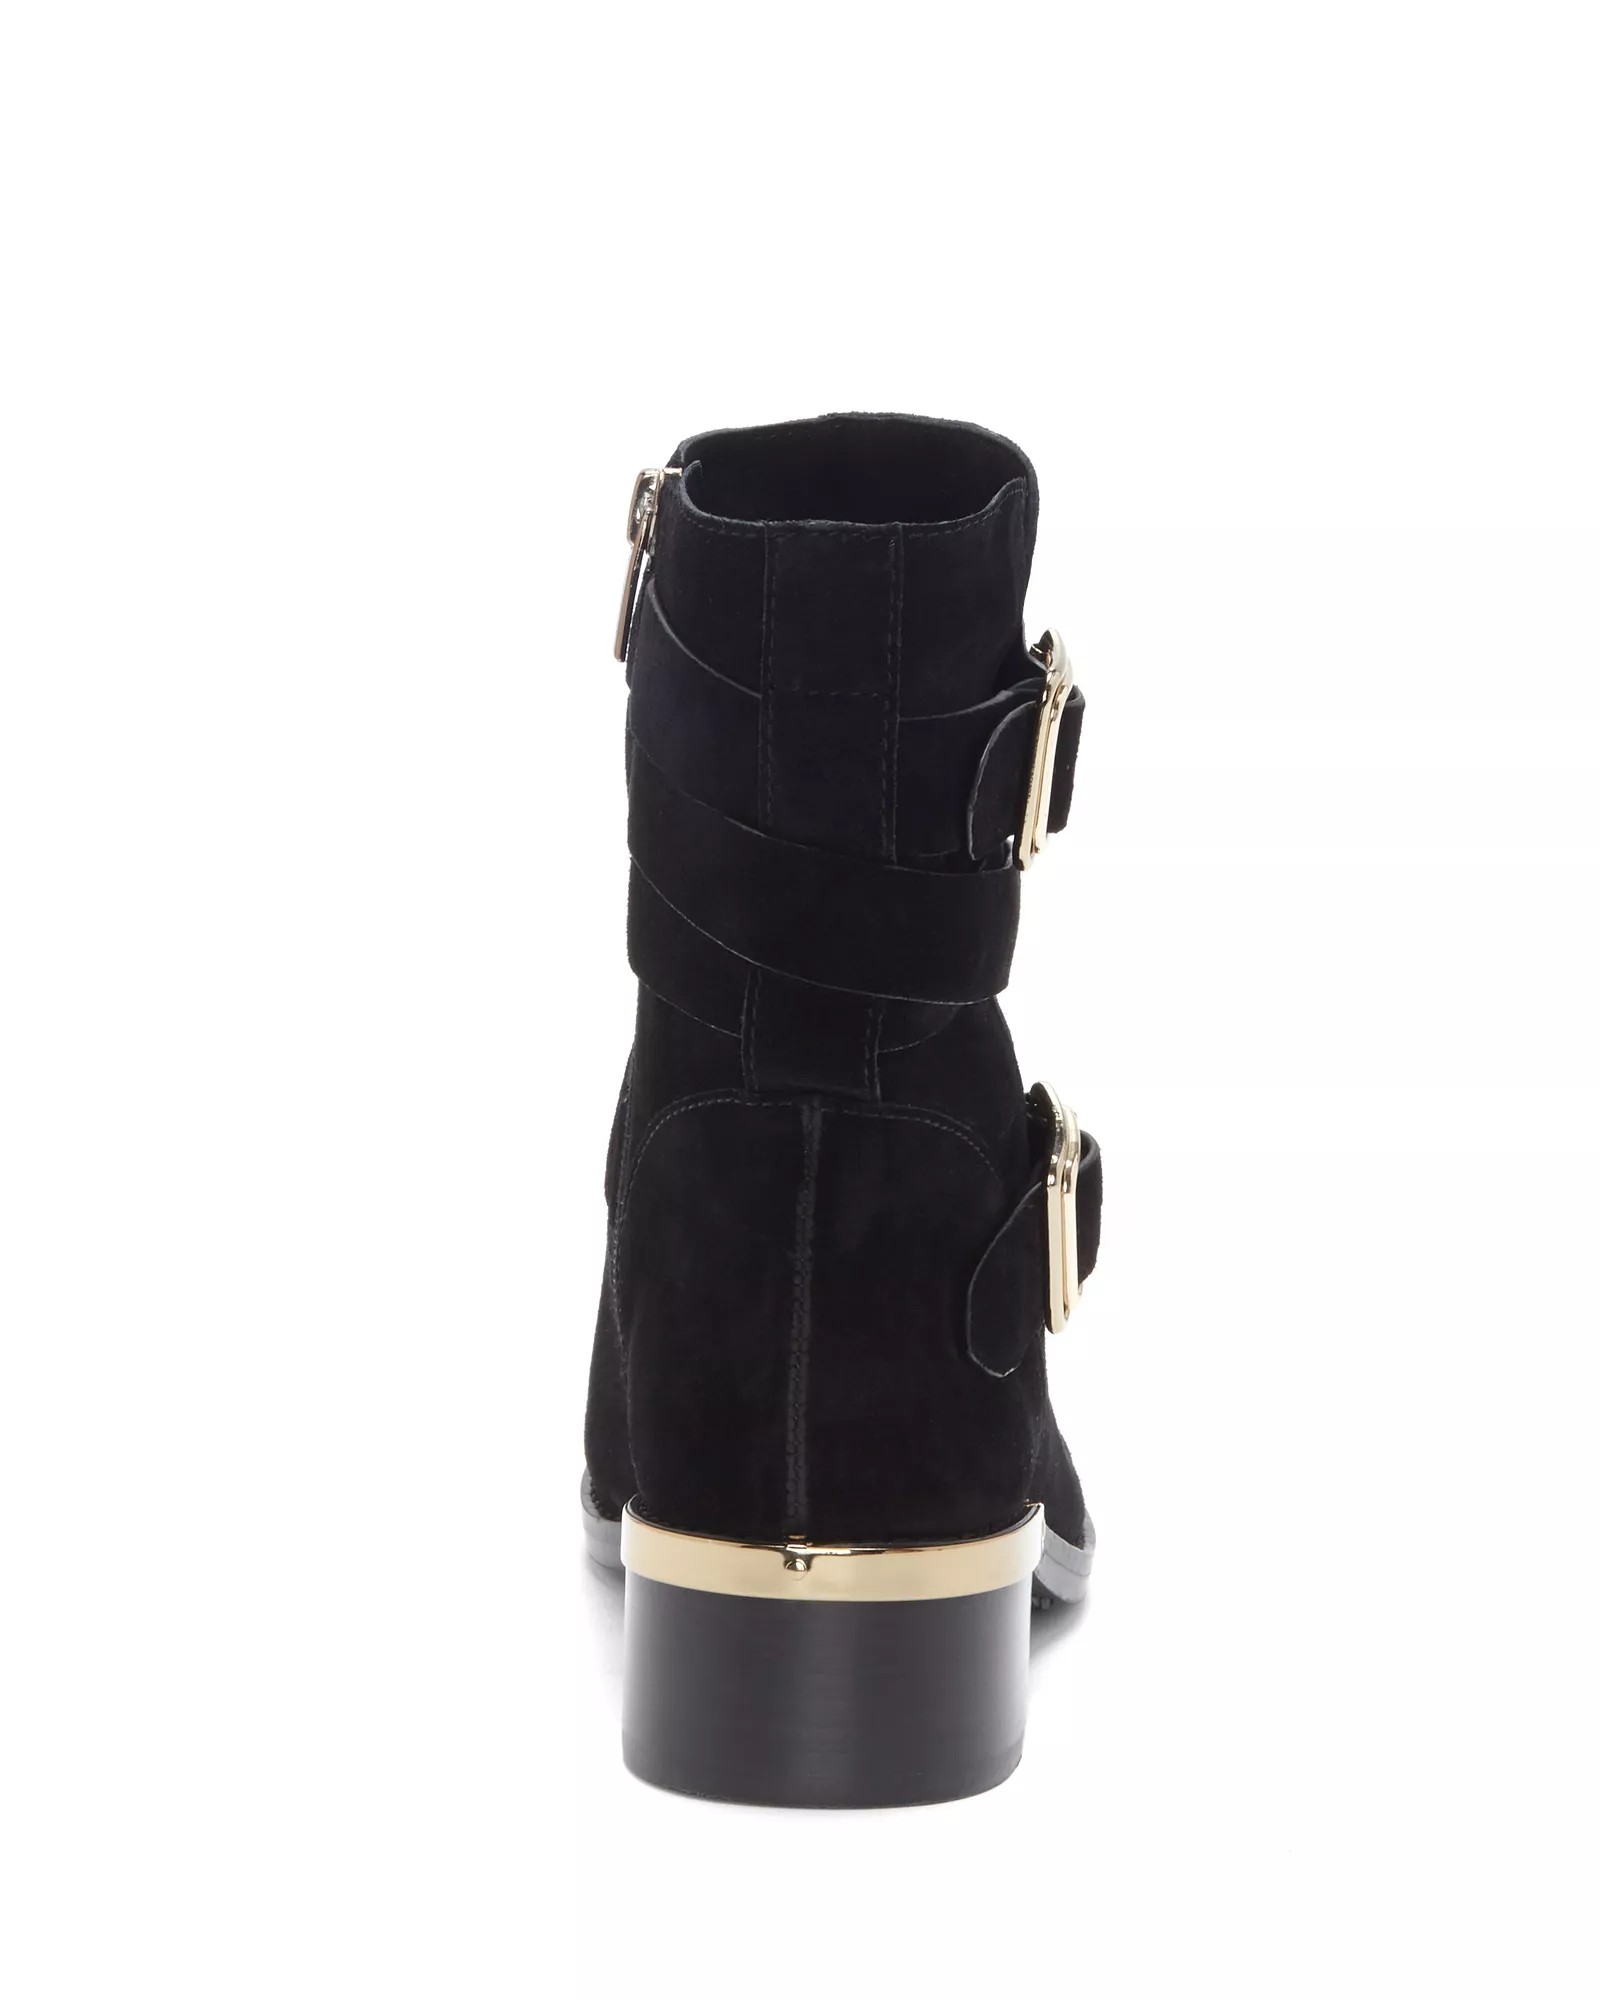 webey boot vince camuto